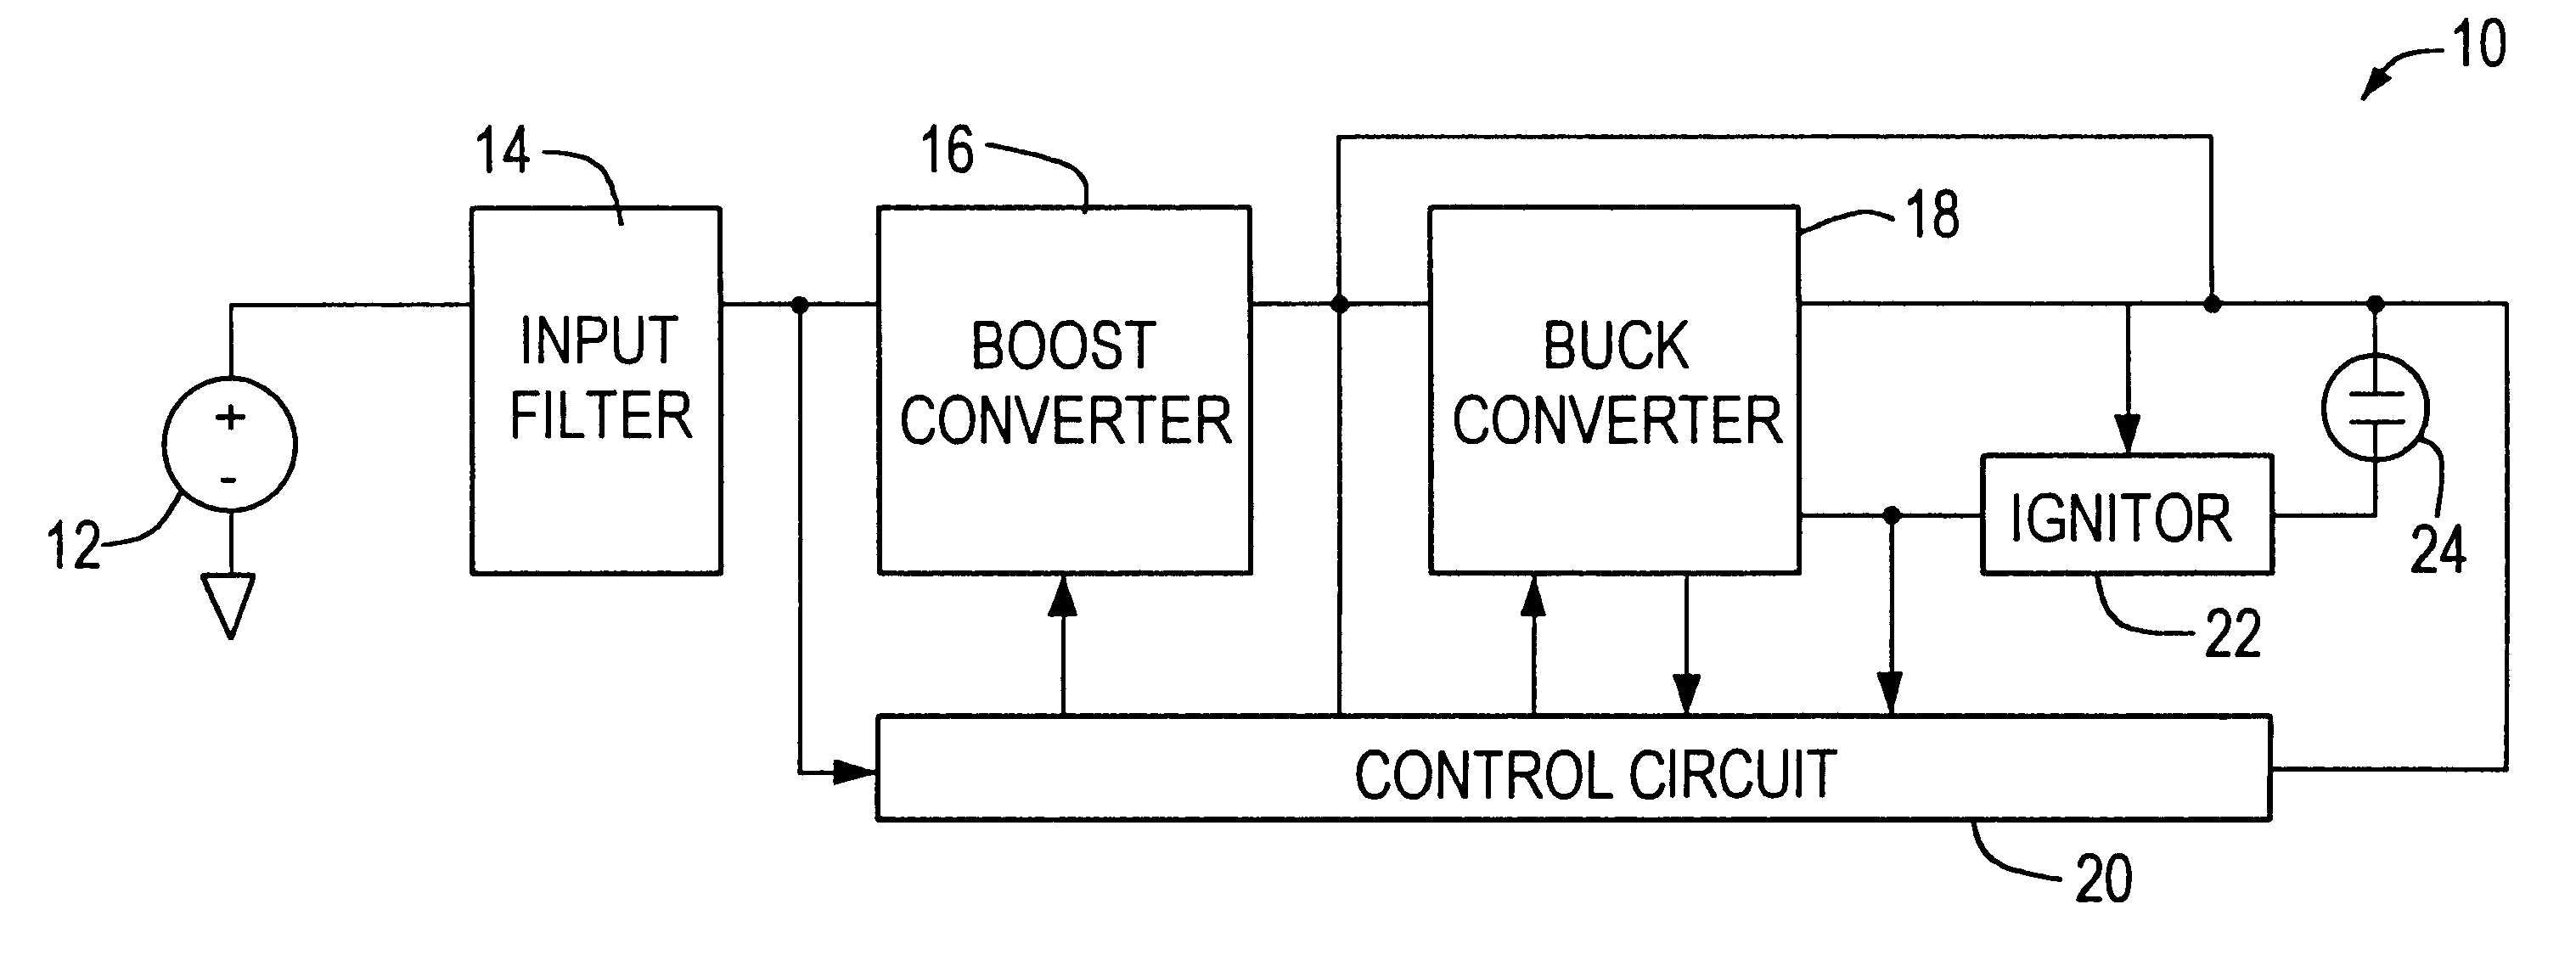 Ballast circuit for high intensity discharge lamps